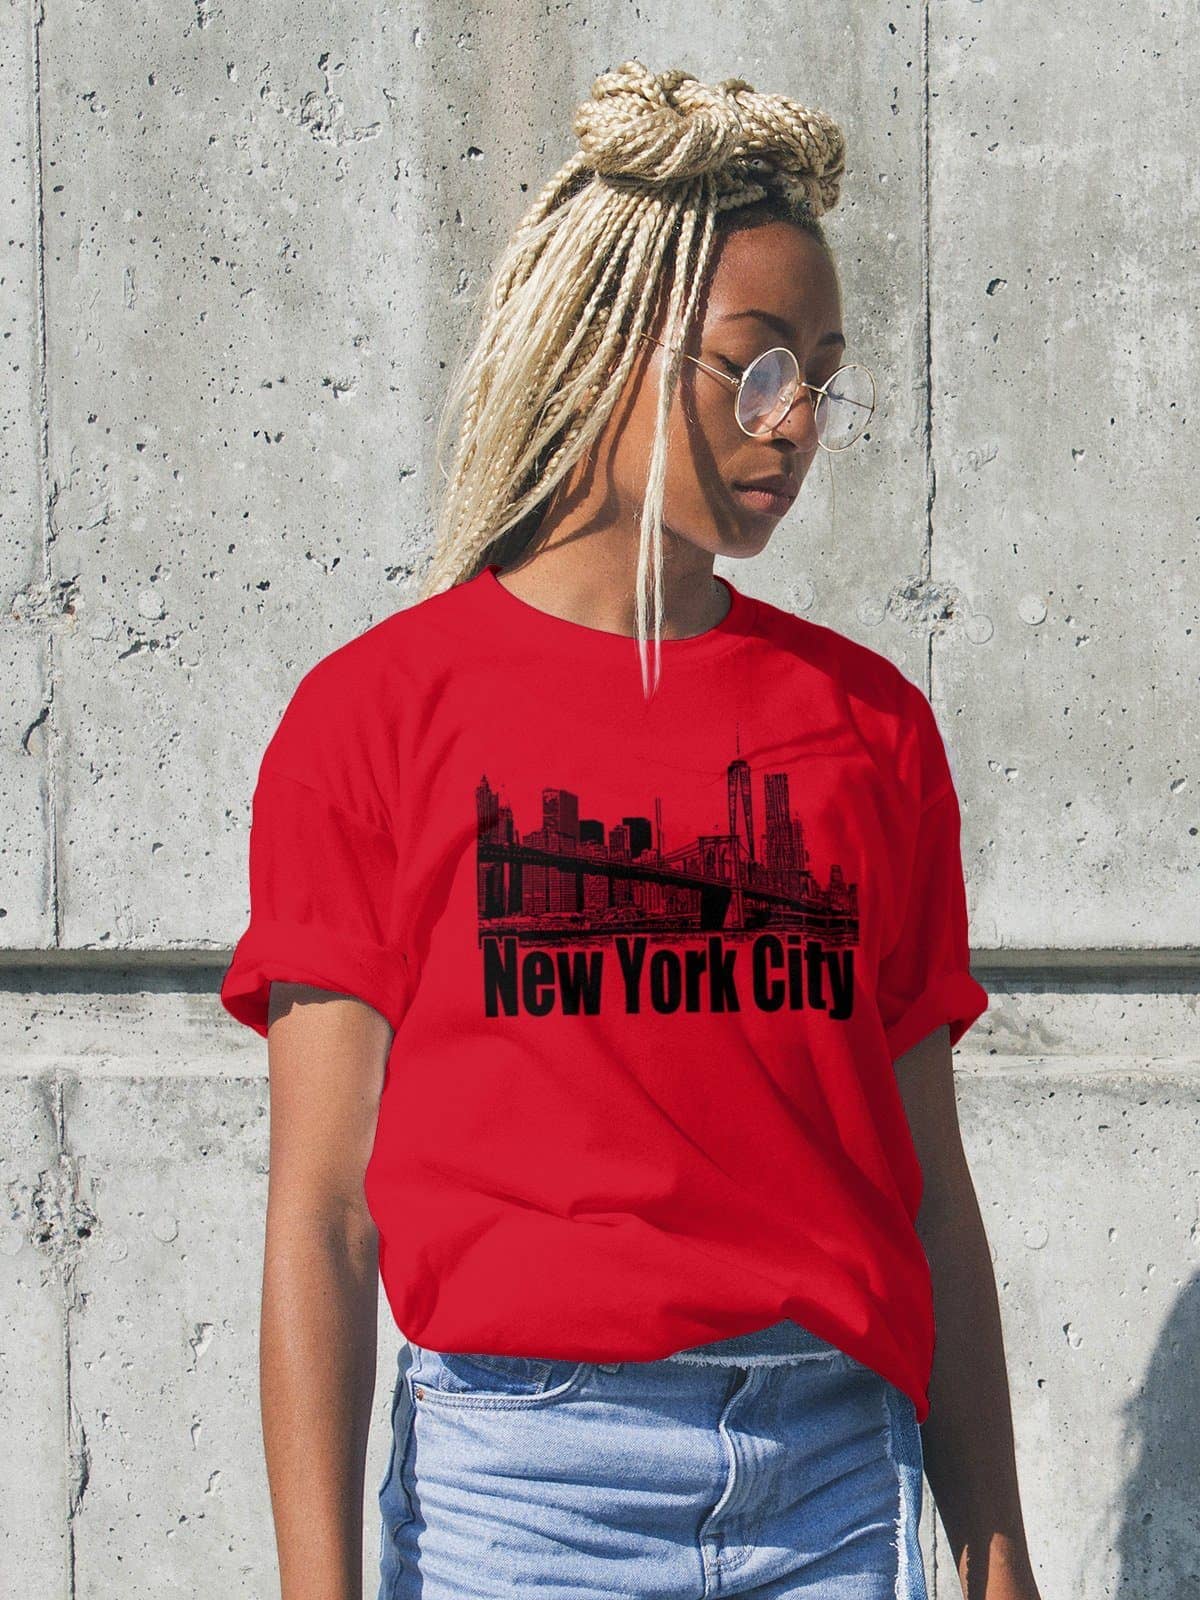 fumle miste dig selv Bitterhed New York City Exclusive Red T Shirt for Men and Women freeshipping - Catch  My Drift India